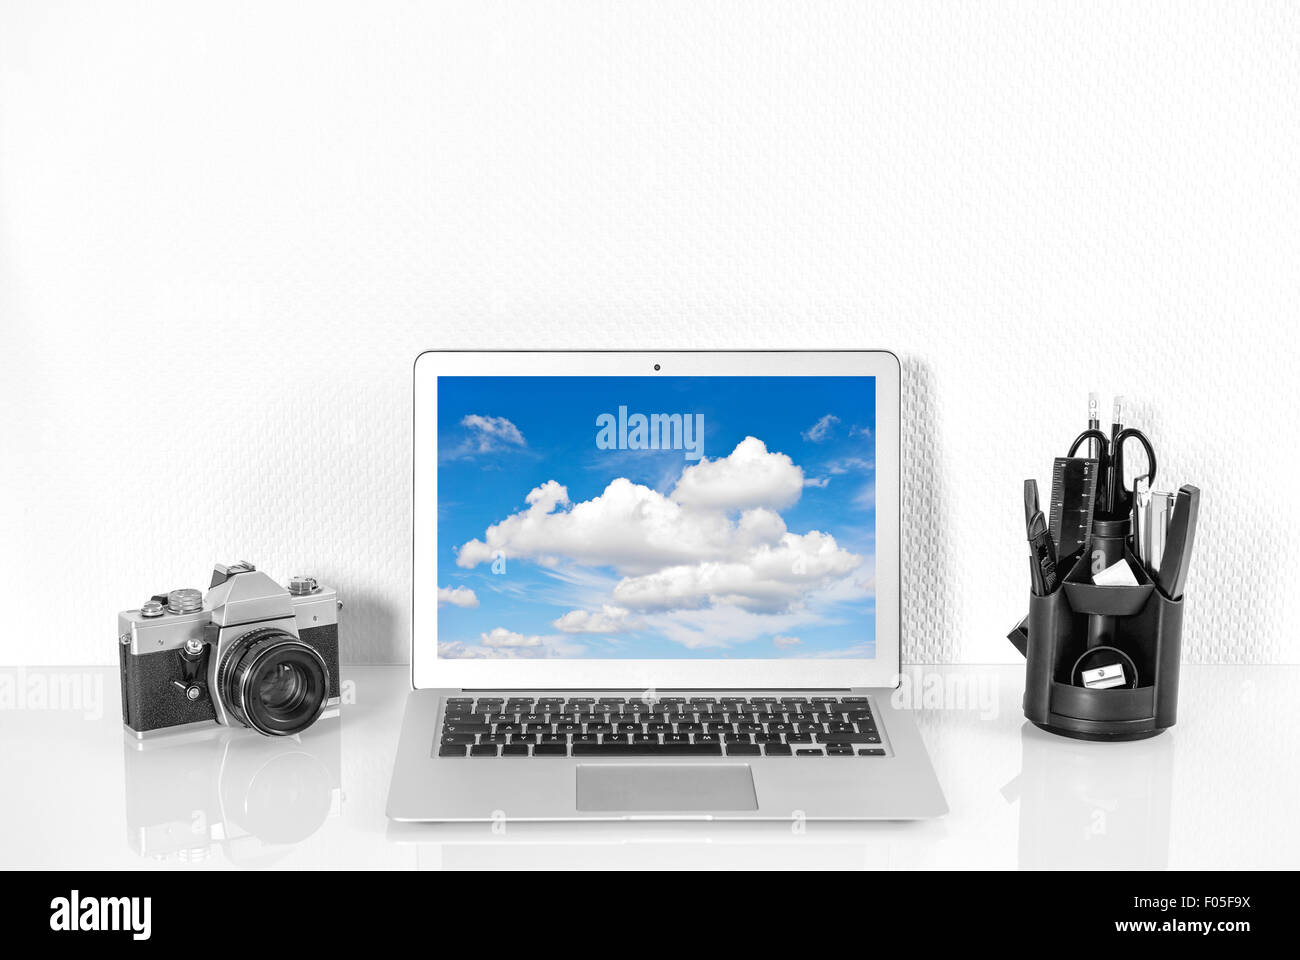 Working station with office supplies and analoge vintage Camera.  Workplace Mock Up with product display Stock Photo